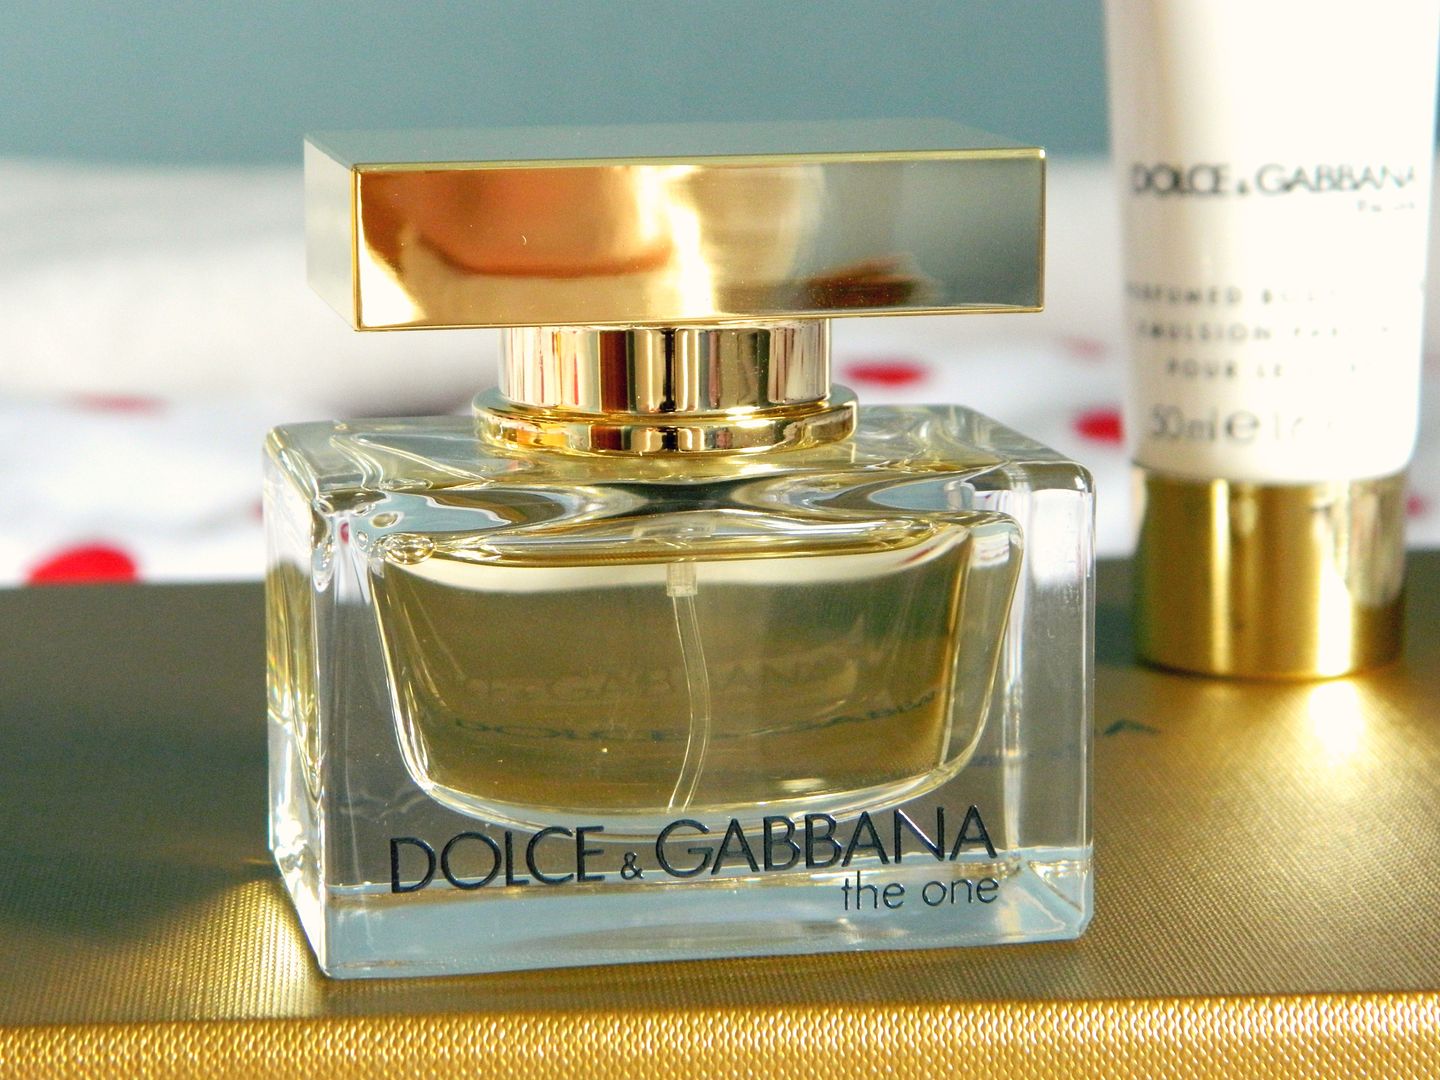 Christmas Gift Guide For Her Fragrance Sets Dolce And Gabbana The One Perfume Body LotionSet Belle-amie UK Beauty Fashion Lifestyle Blog